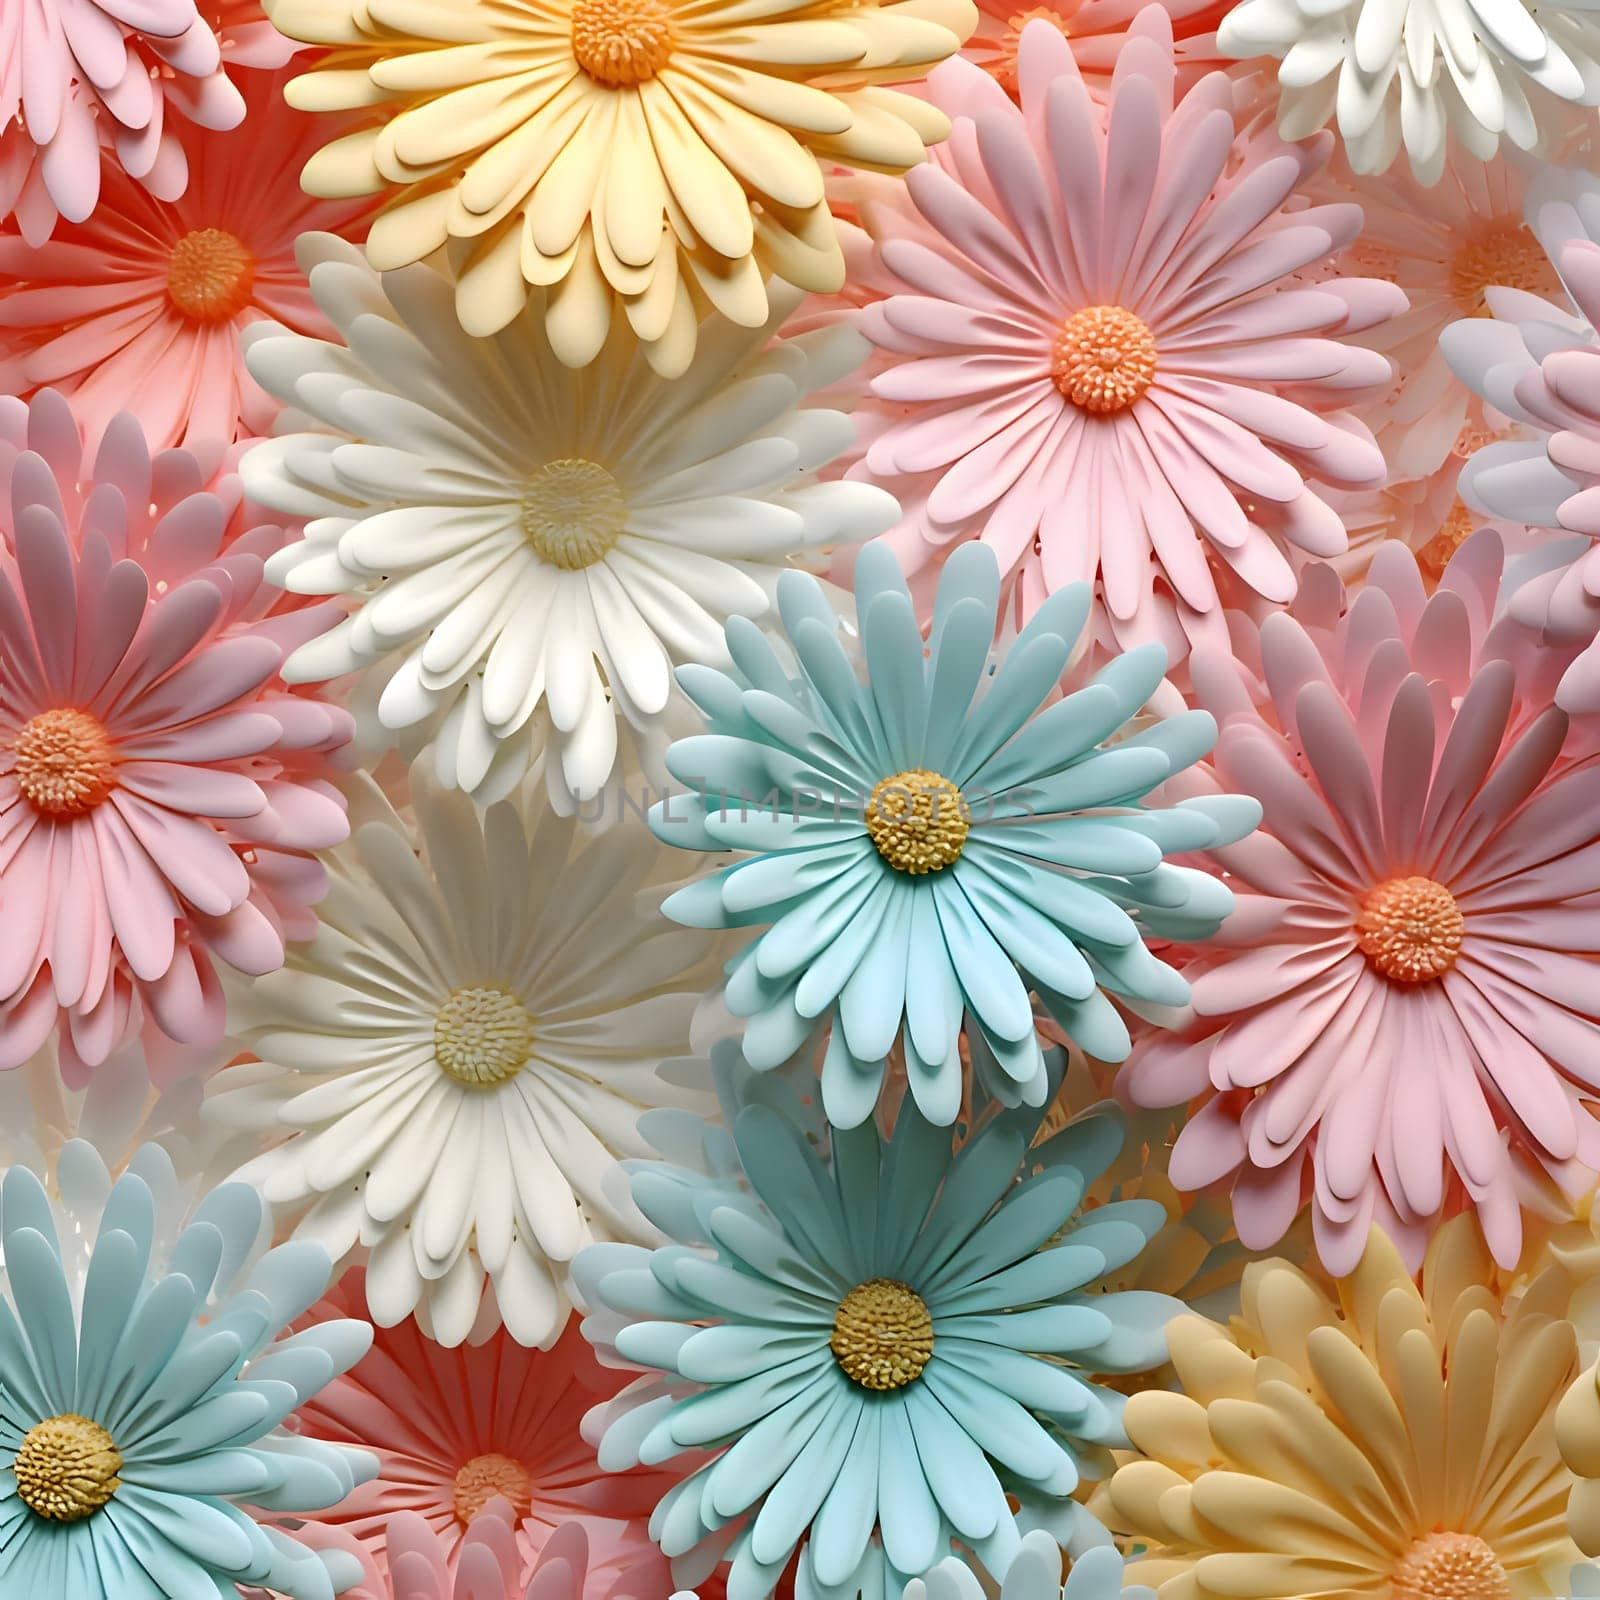 Patterns and banners backgrounds: Colorful daisies background. Seamless floral pattern.